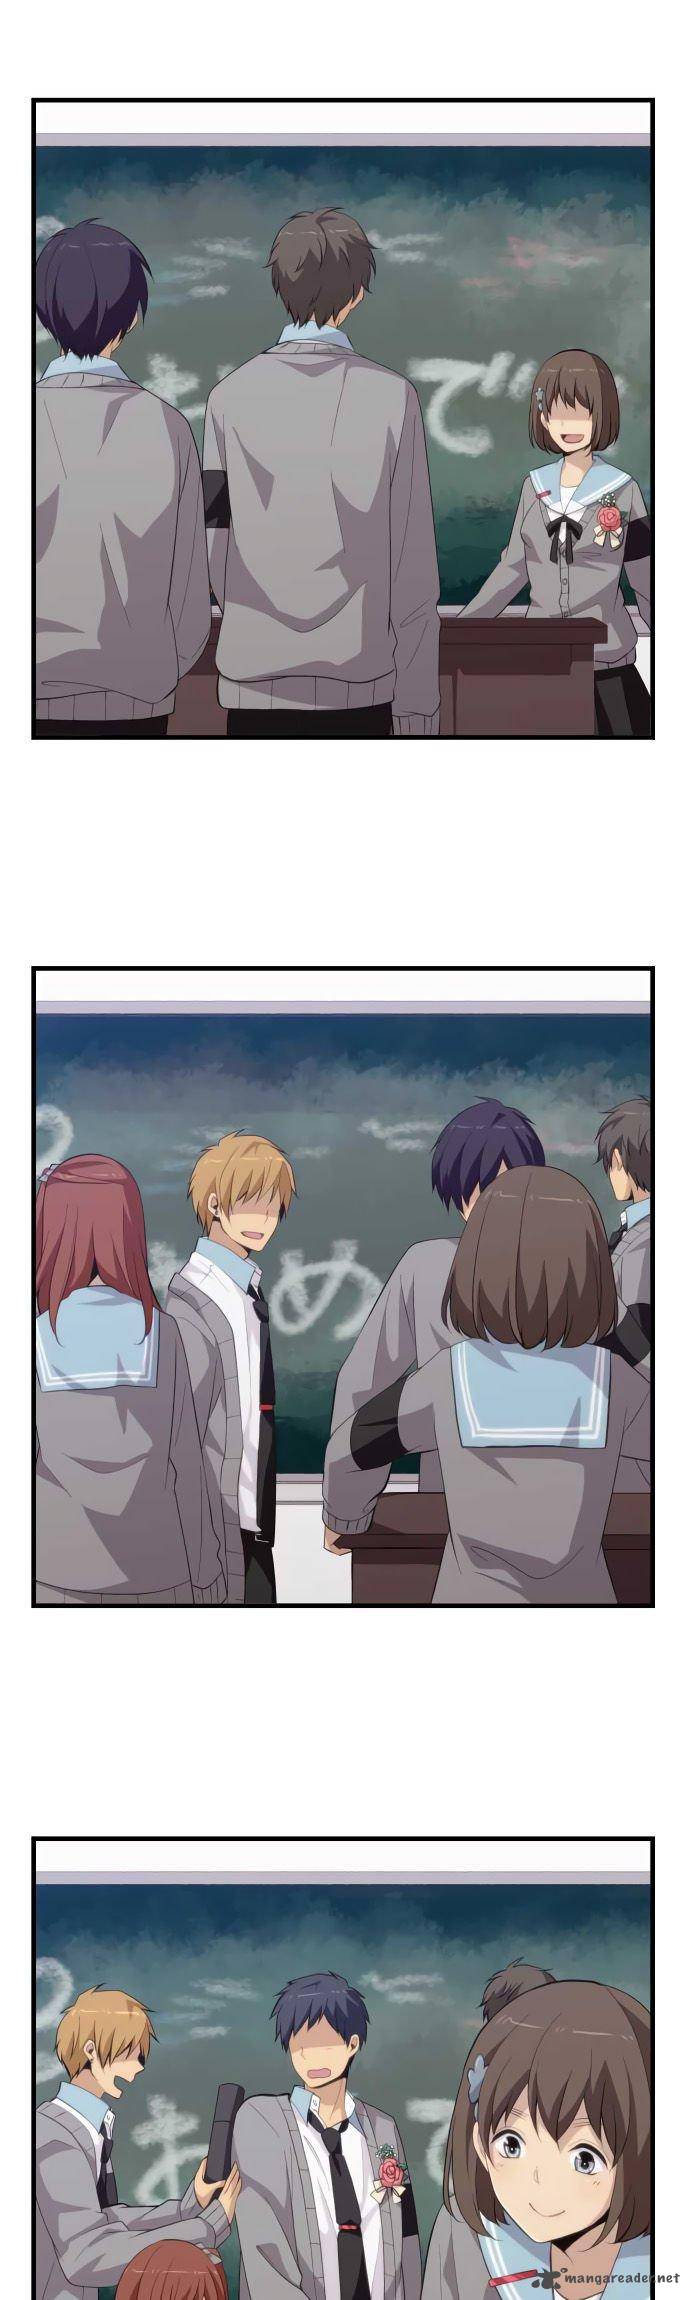 Relife 212 6